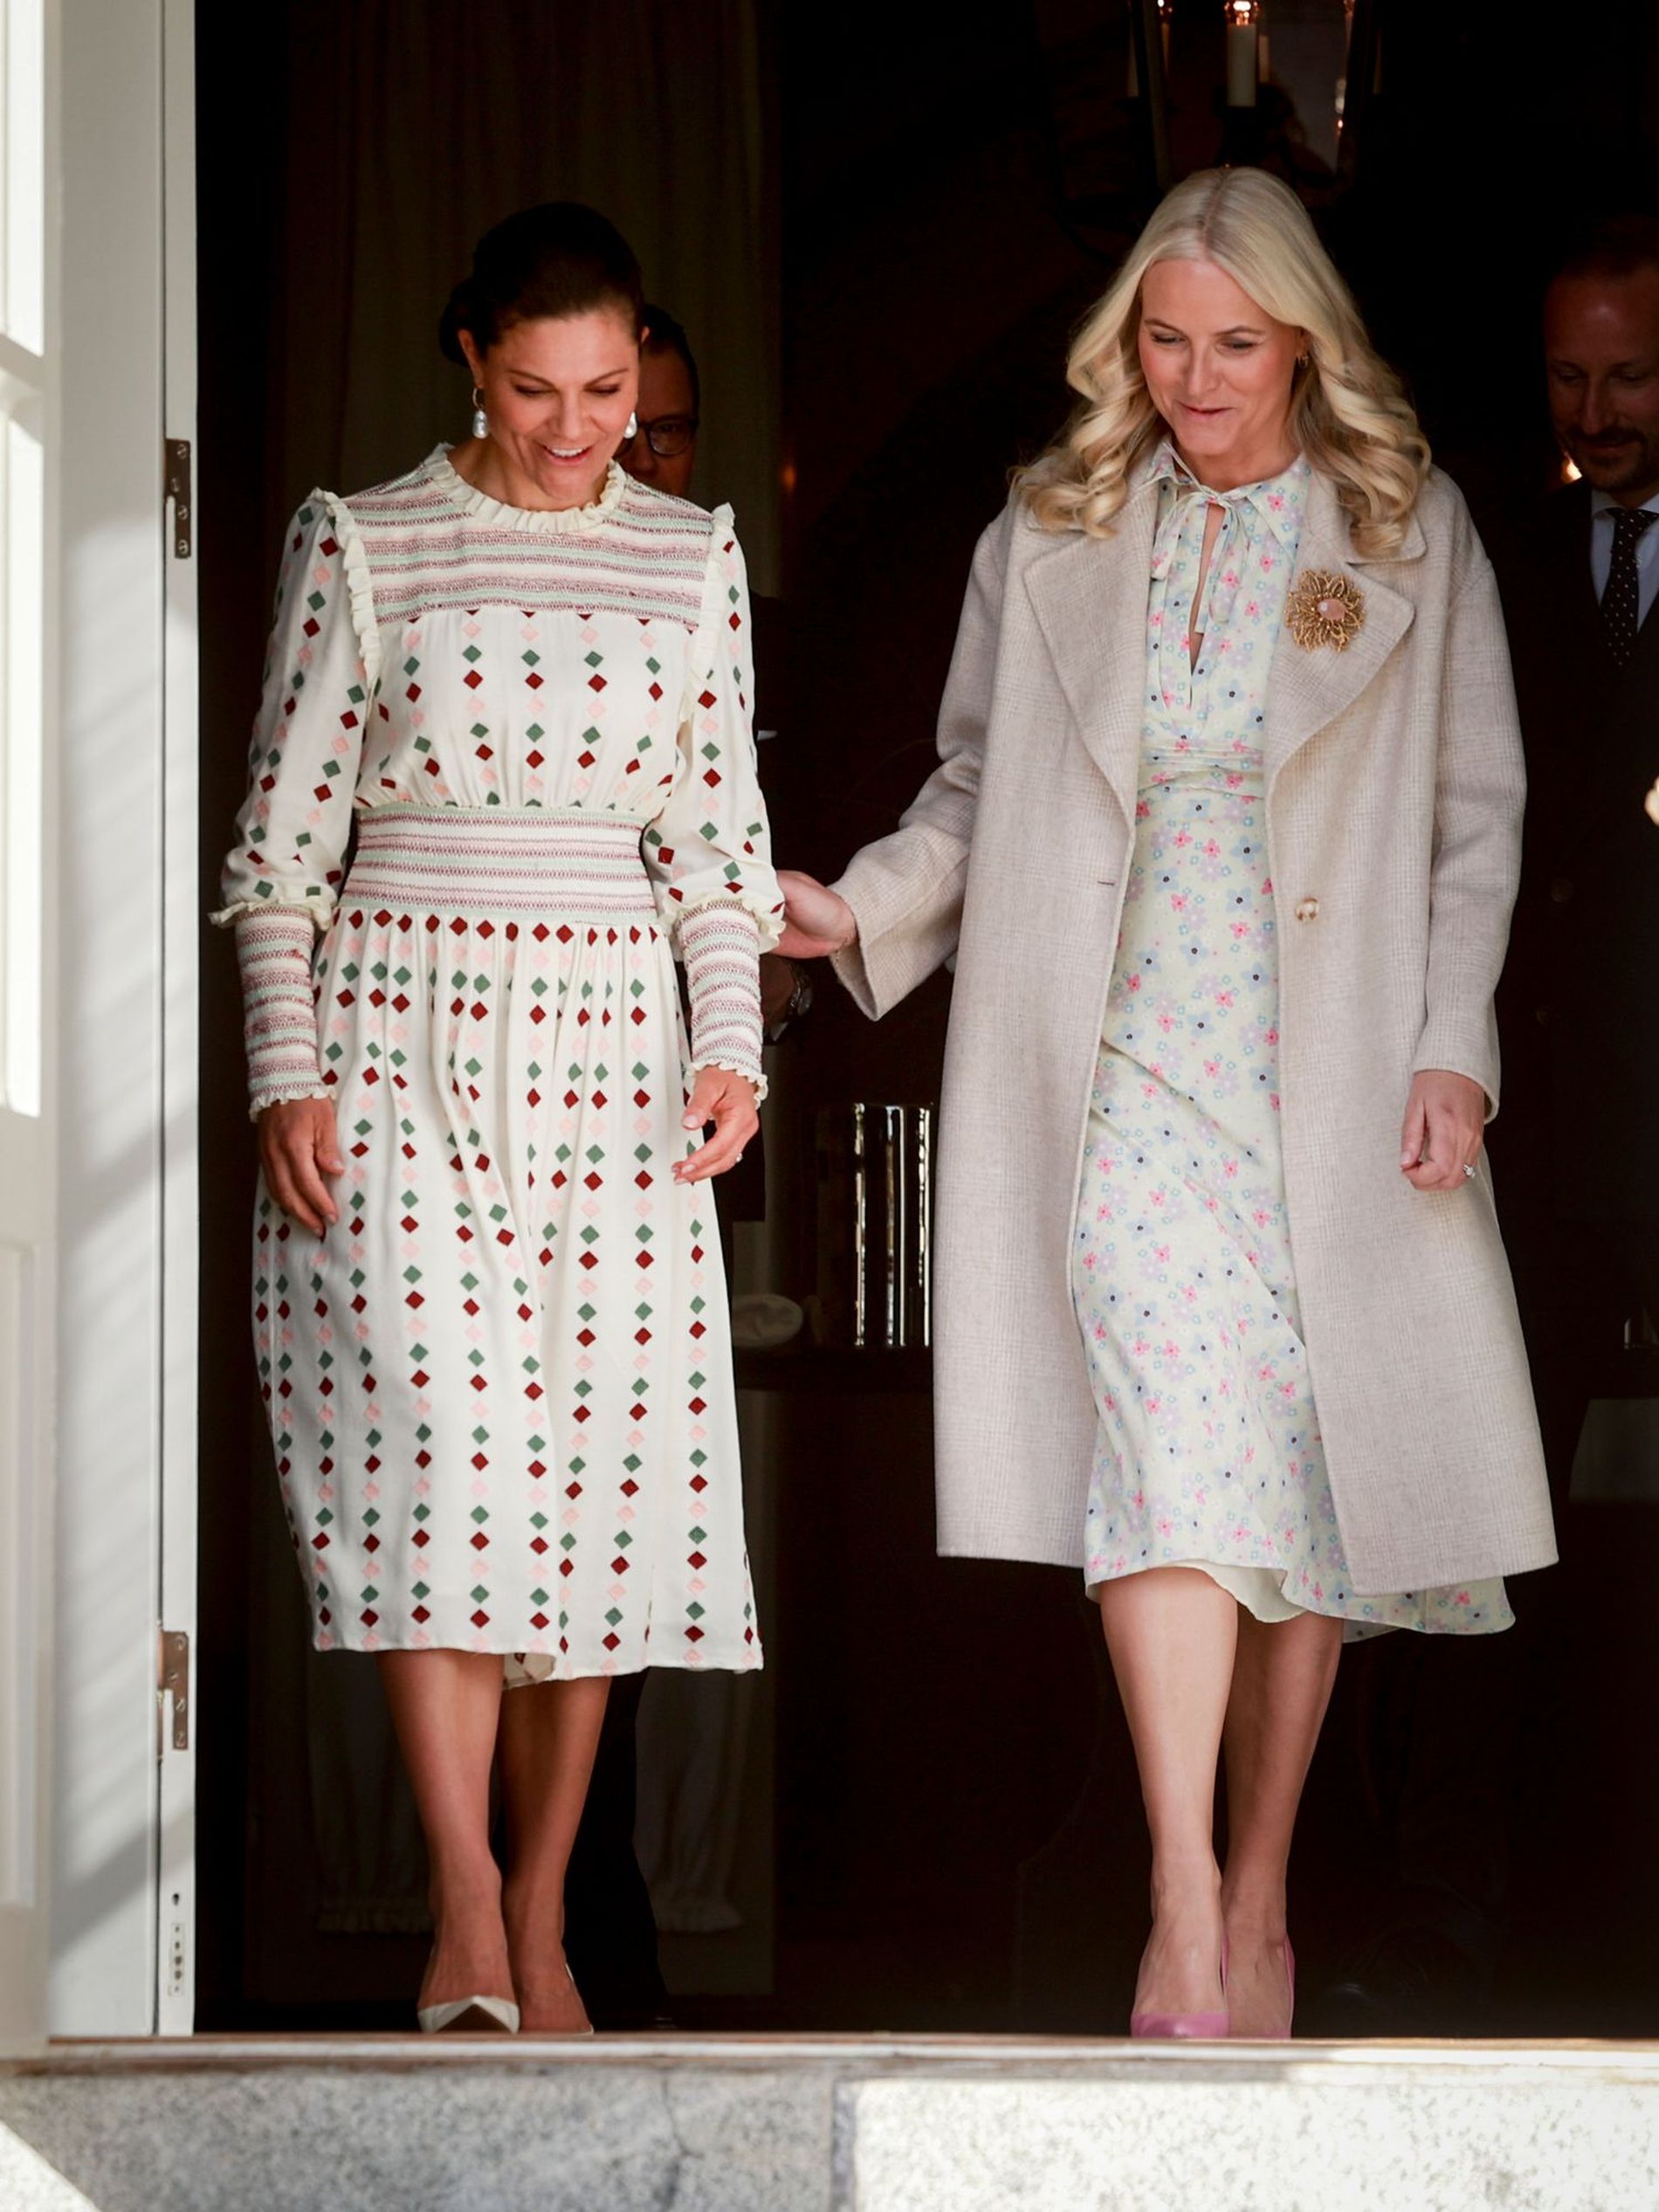 Crown Princess Victoria of Sweden and Mette-Marit, Crown Princess of Norway in the Haga palace